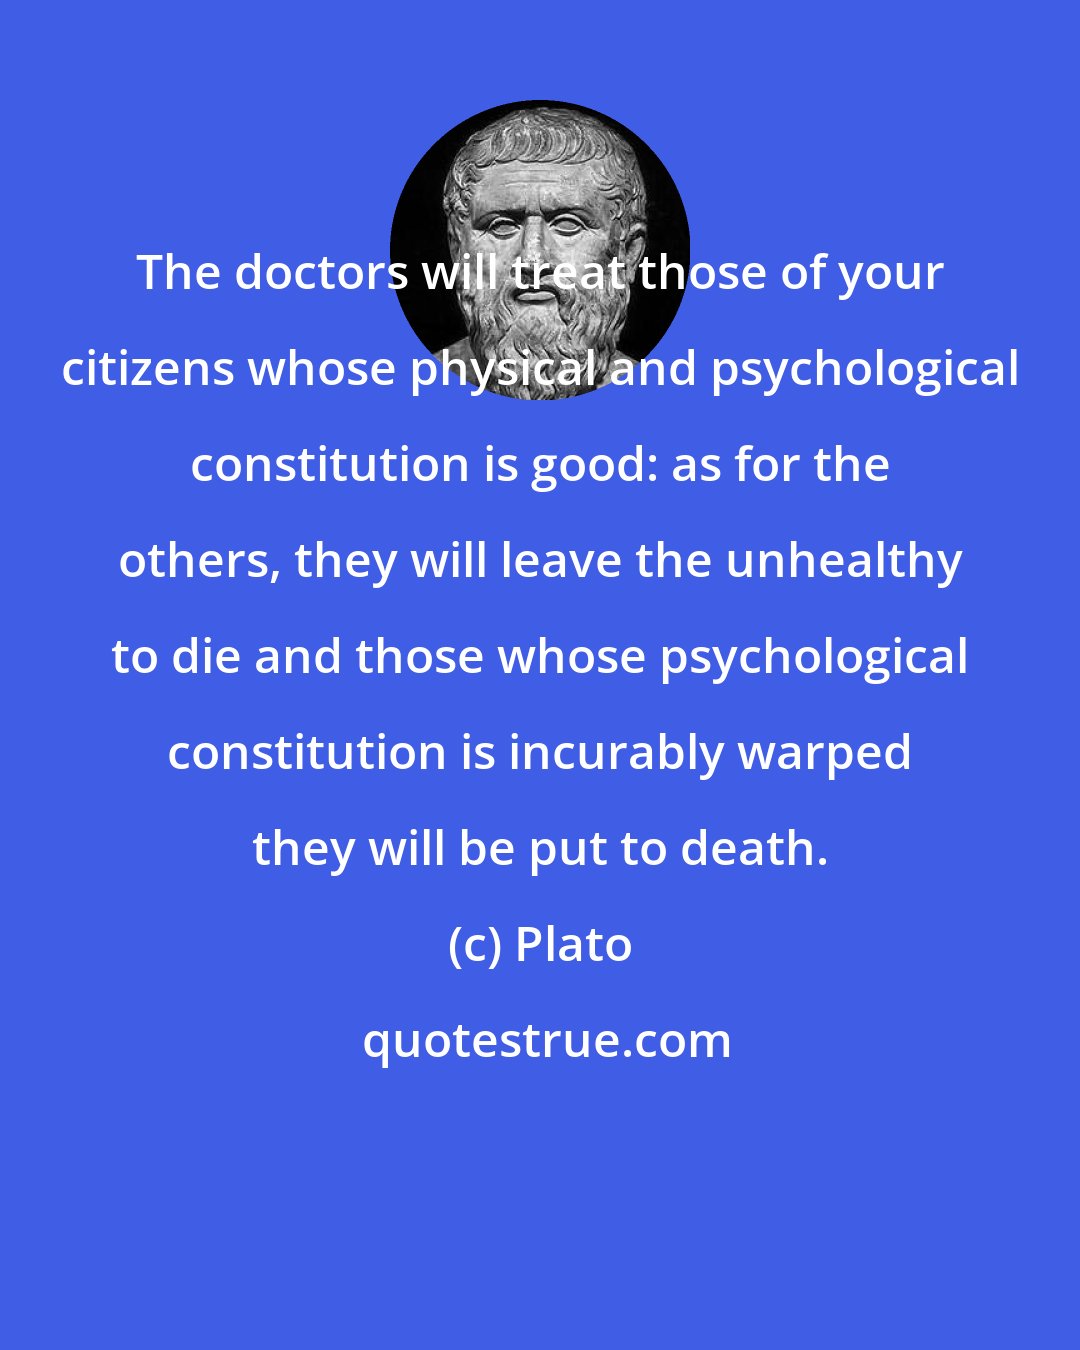 Plato: The doctors will treat those of your citizens whose physical and psychological constitution is good: as for the others, they will leave the unhealthy to die and those whose psychological constitution is incurably warped they will be put to death.